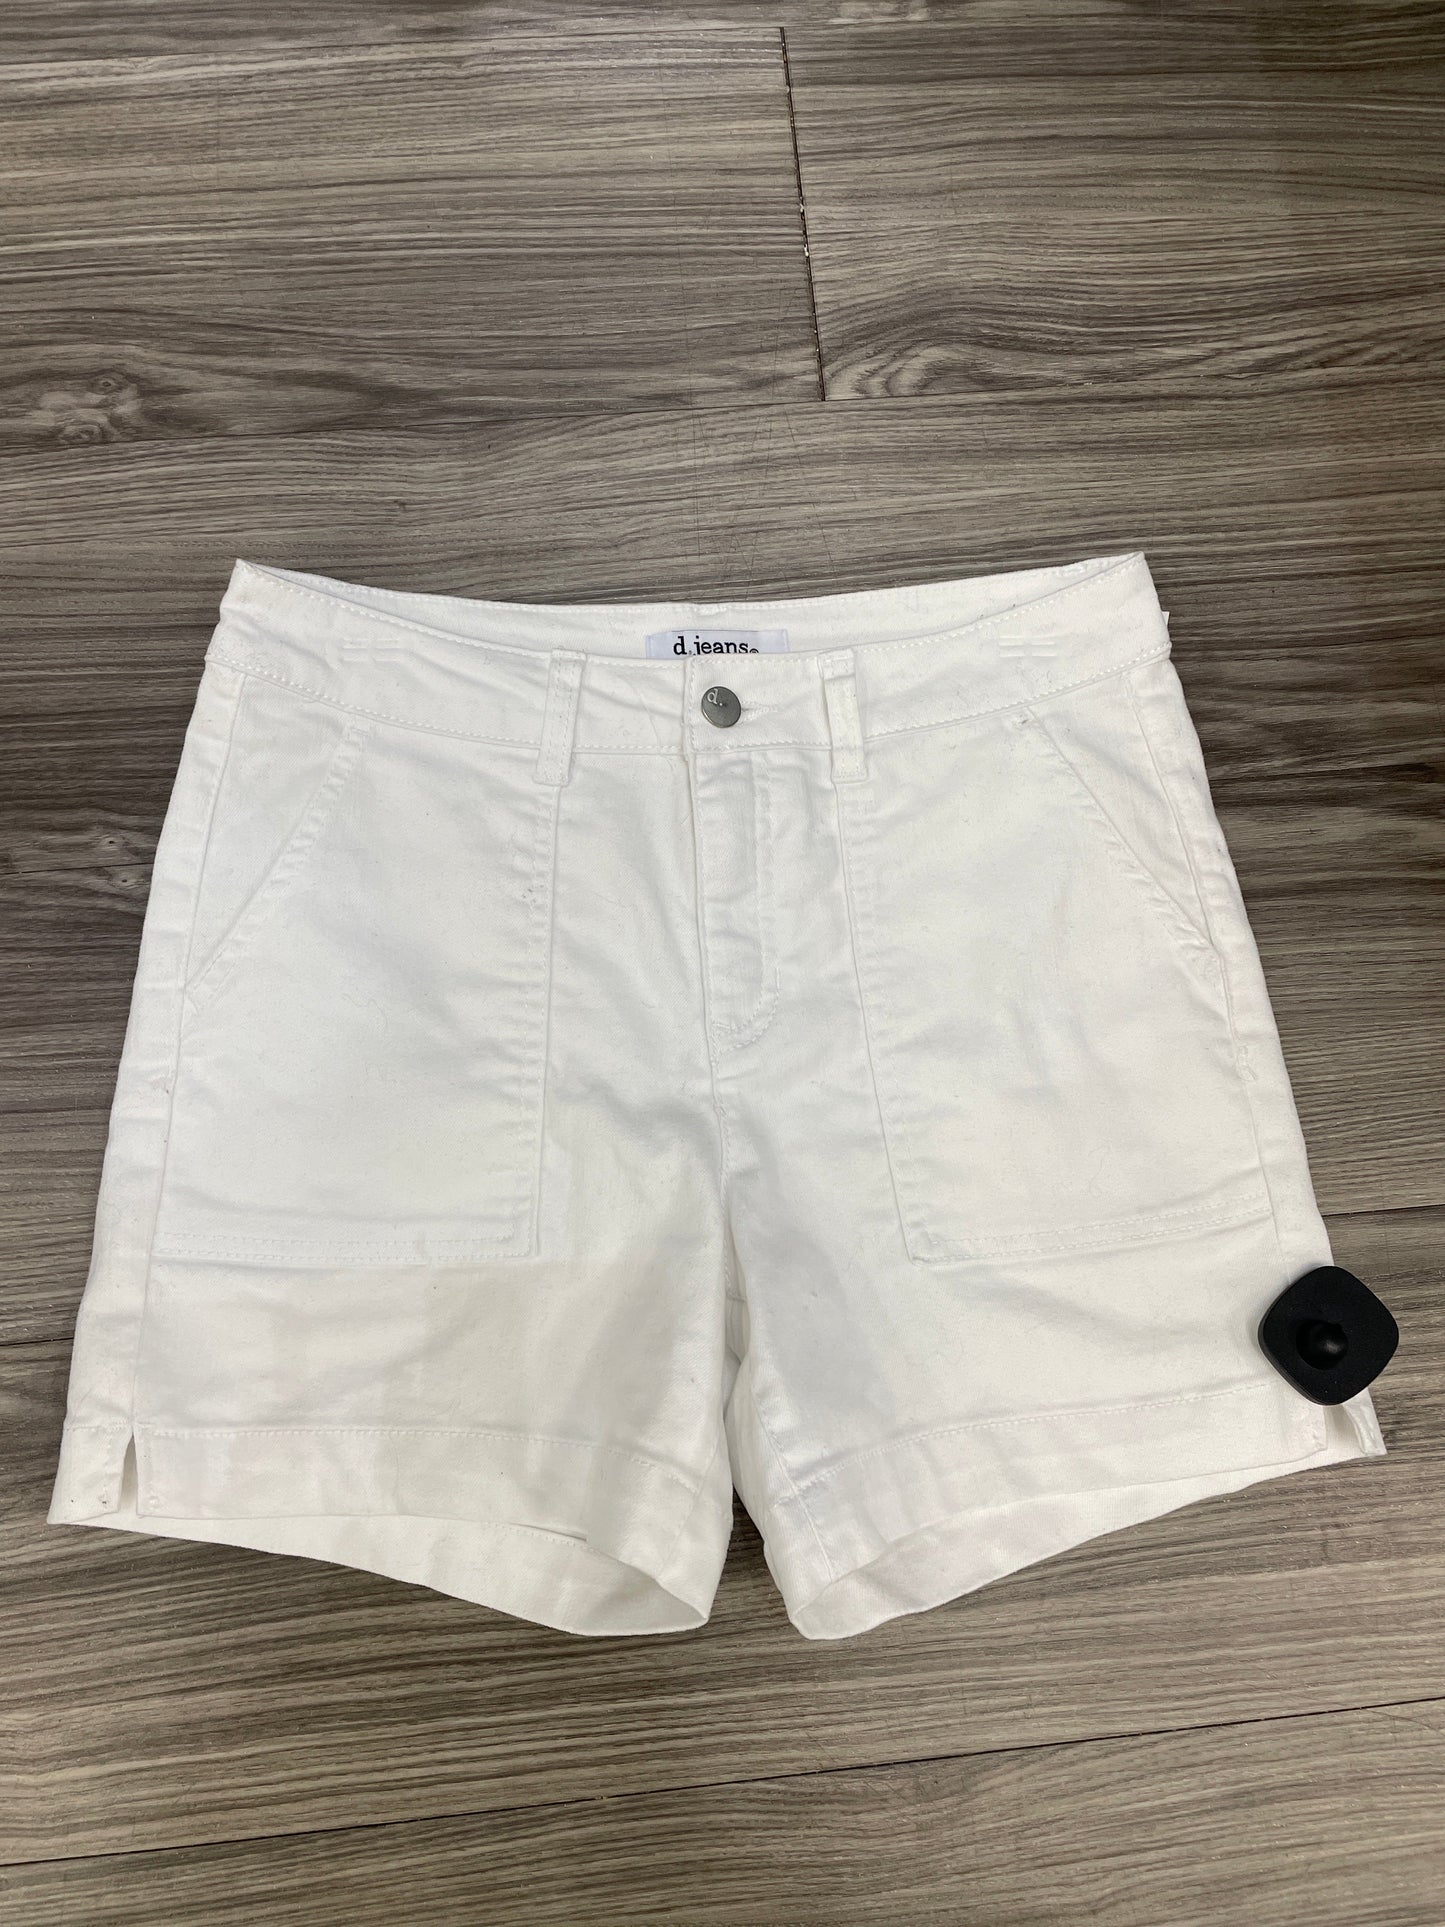 Shorts By D Jeans  Size: 4